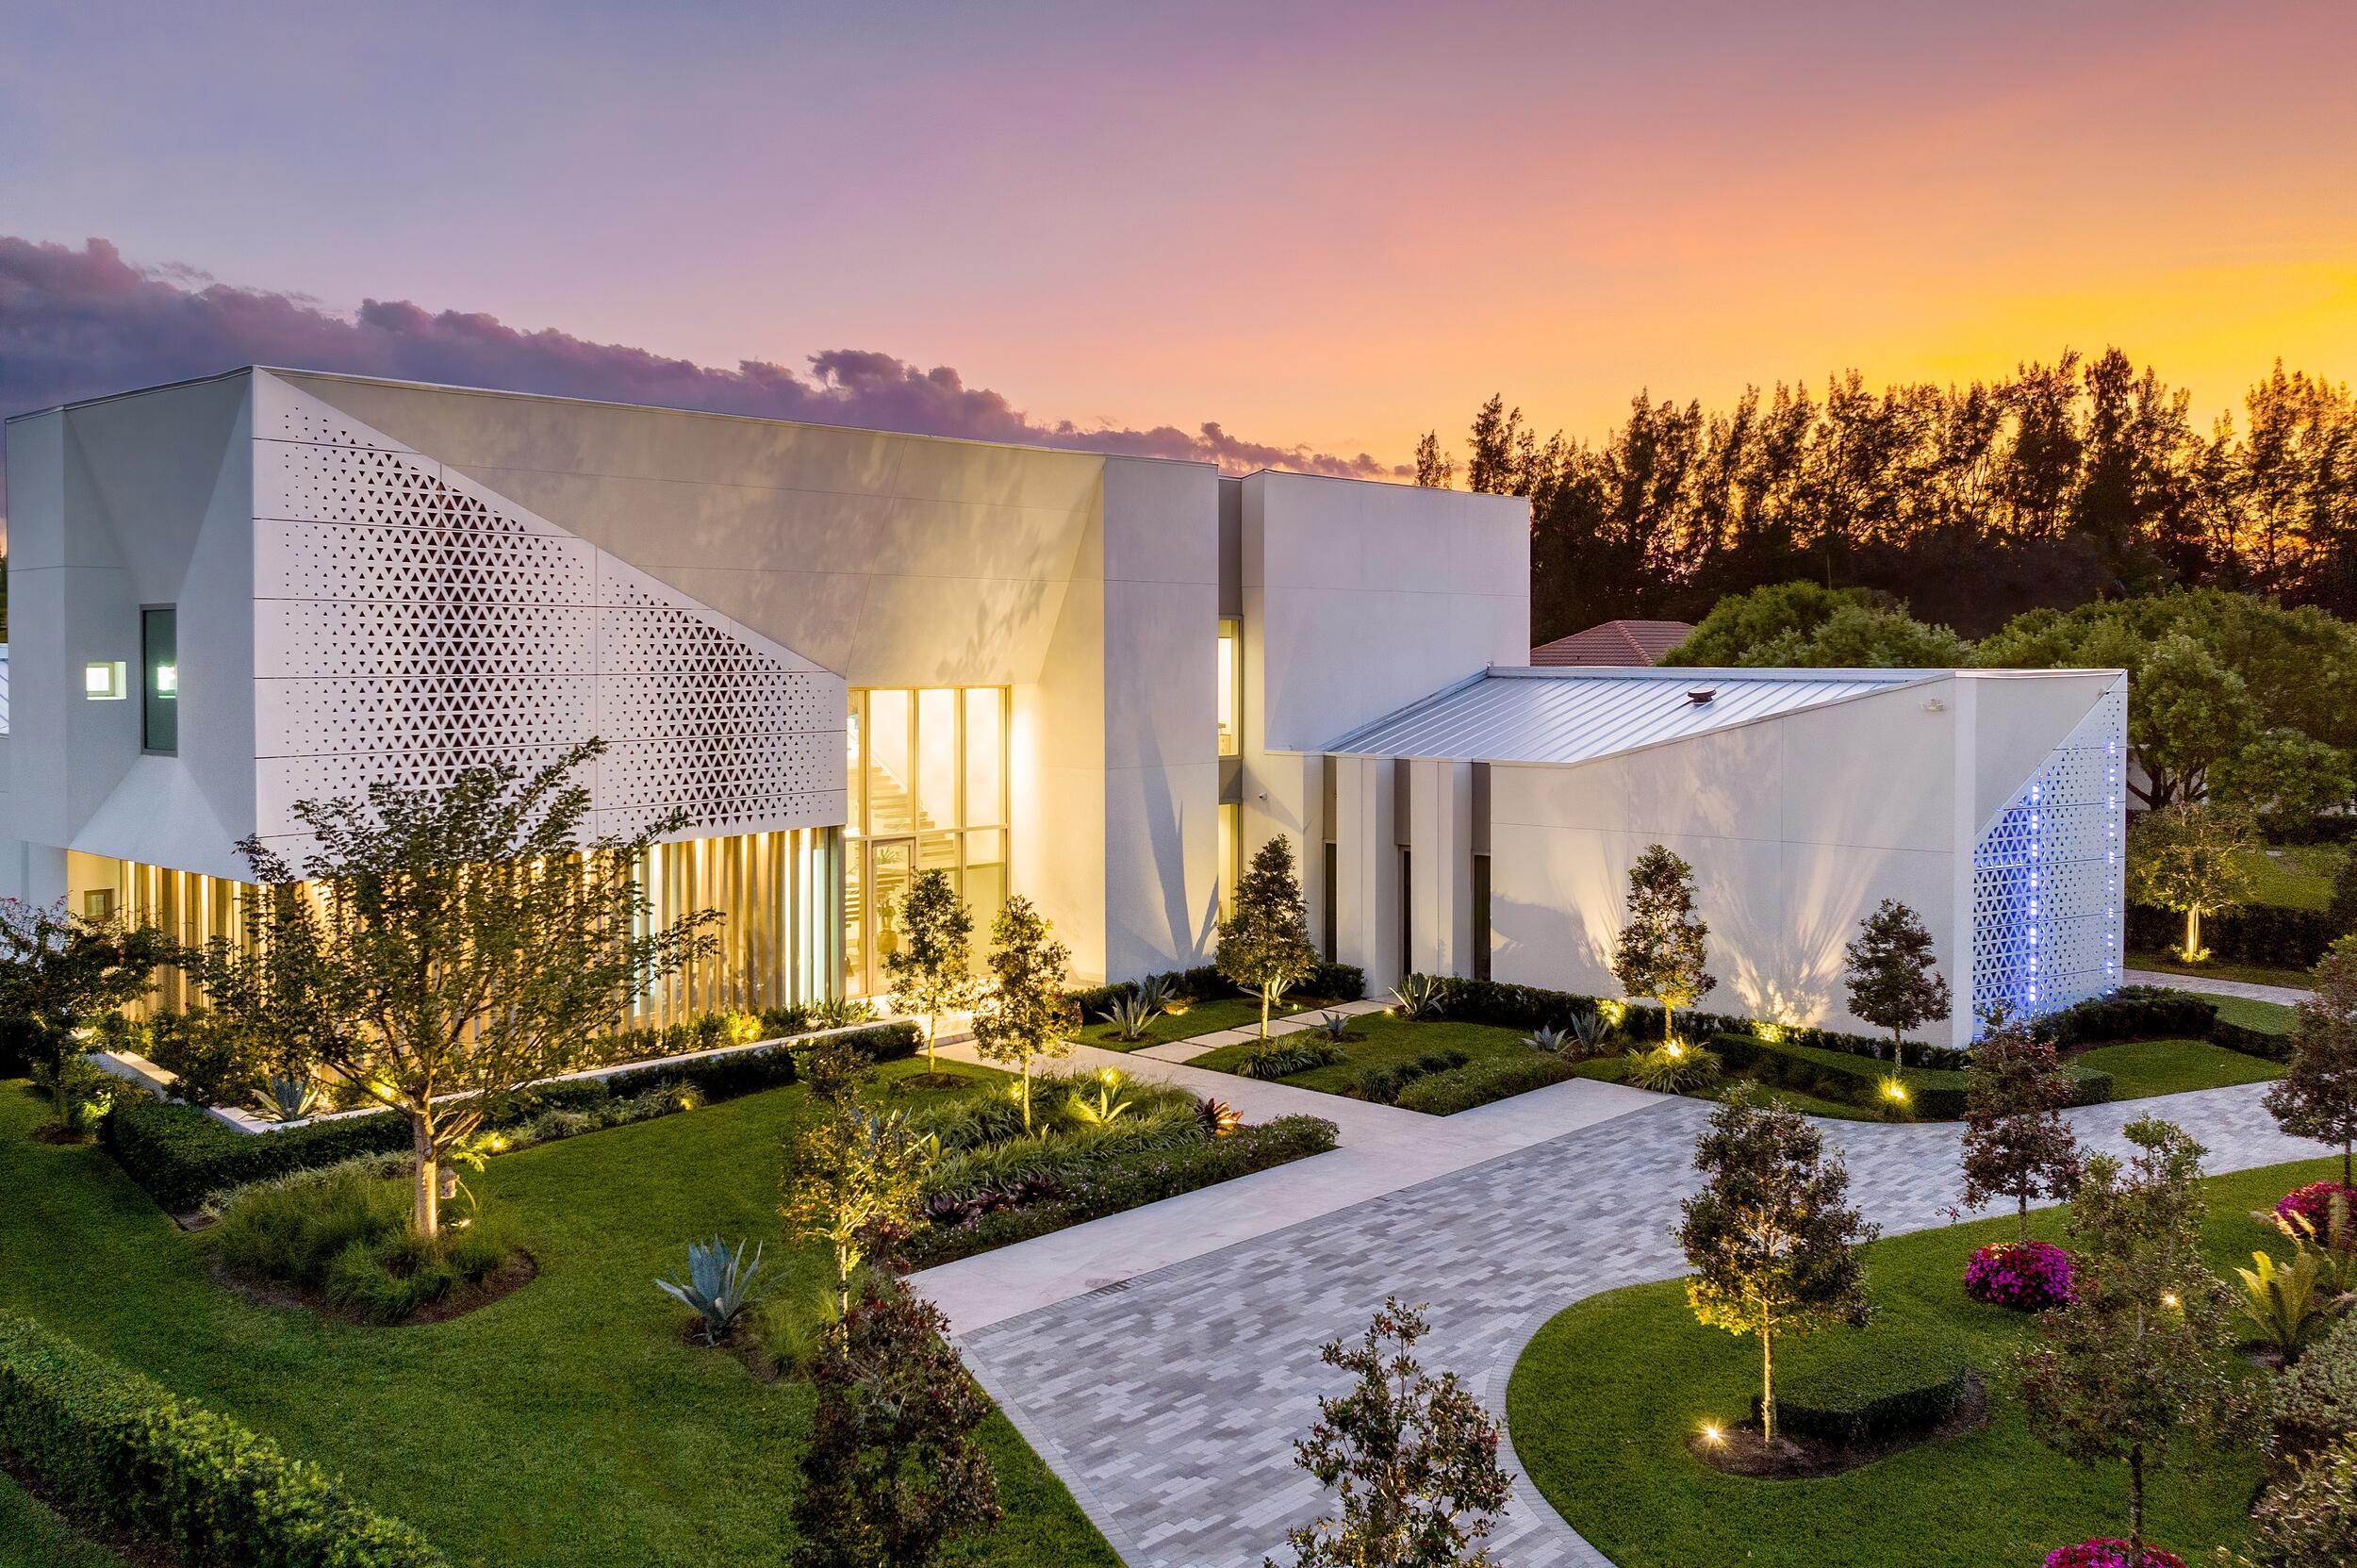 Welcome to this one-of-a-kind modern sanctuary in the heart of Palm Beach Gardens! This ultra-luxury architectural build boasts 5 bd, 8 ba & 2 half ba situated on over 44,000 square feet of Japanese inspired landscaping. This estate offers all of the advancements of new-age construction with stainless steel panelized framing, glass elavator with custom painted wall and glass suspended staircase. Keep cool with insulated/laminated impact windows throughout and automized shades. The two-story property features imported rain showers, flushed Italian doors and top-of-the-line appliances. Entertain with 9 seat custom theatre and home gym. Overabundance of indoor/outdoor living with expansive backyard including a 75 ft infinity saltwater pool with glass canopy & folding impact window BBQ space